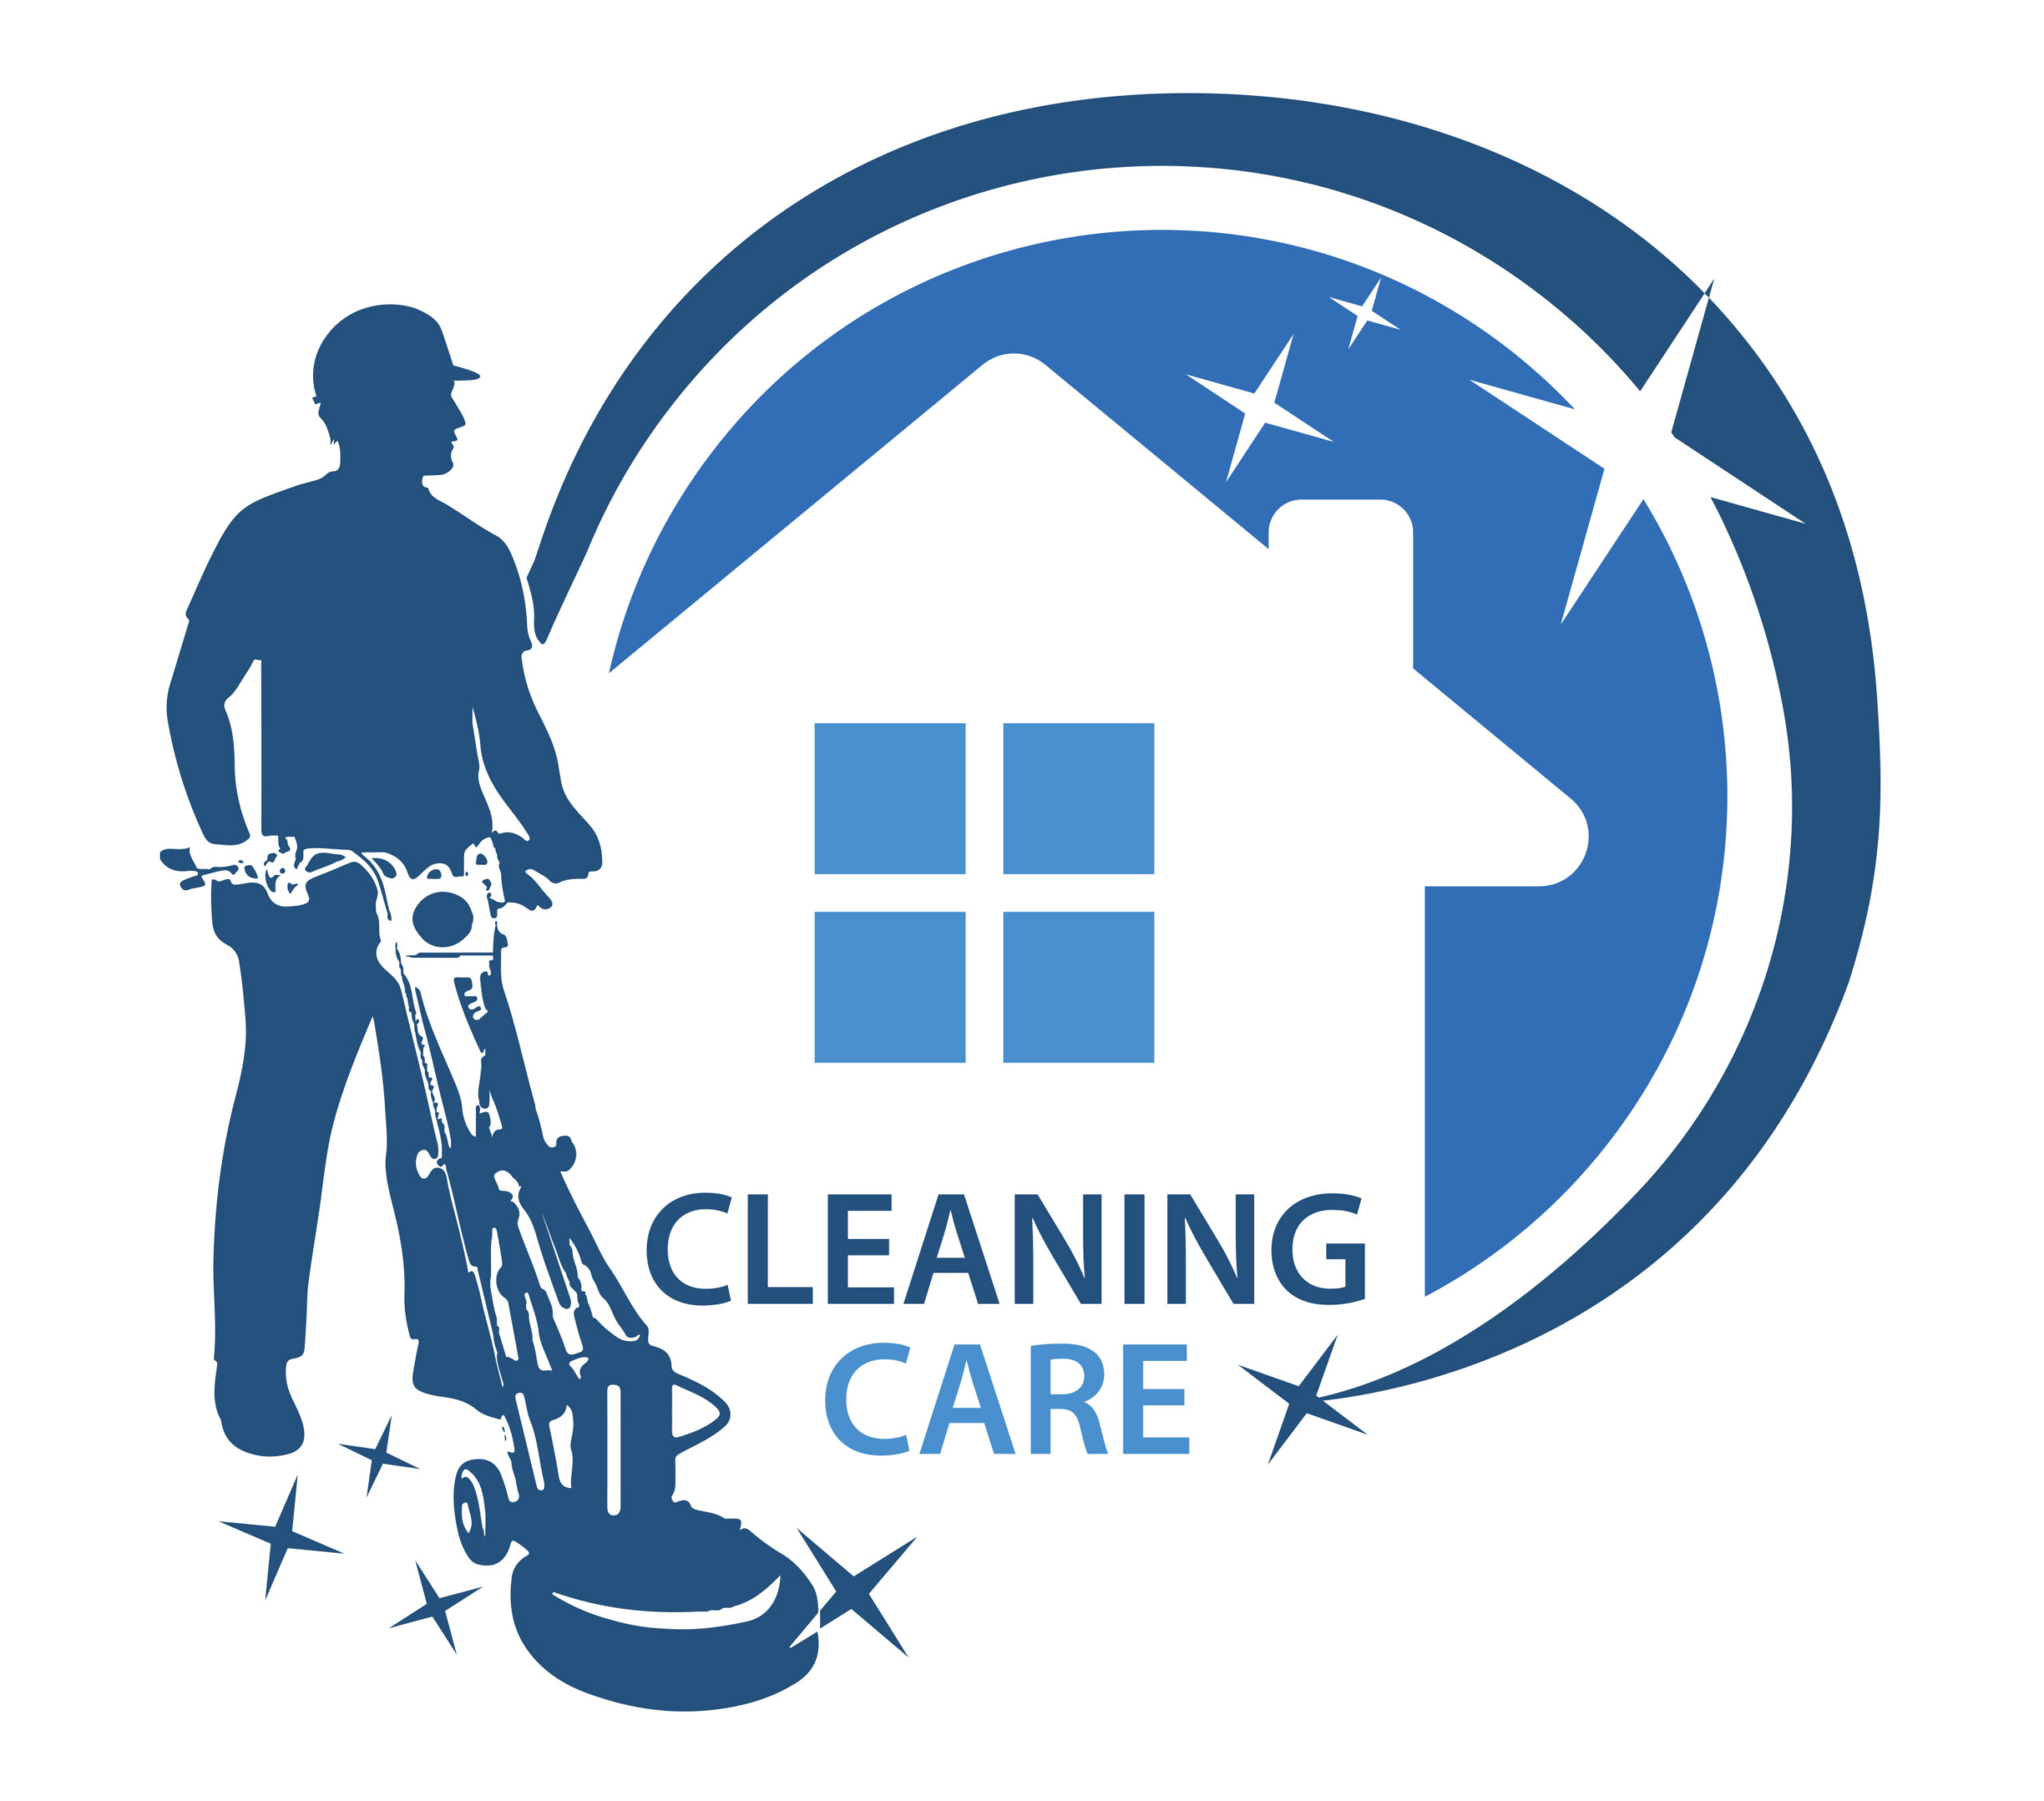 Cleaning care